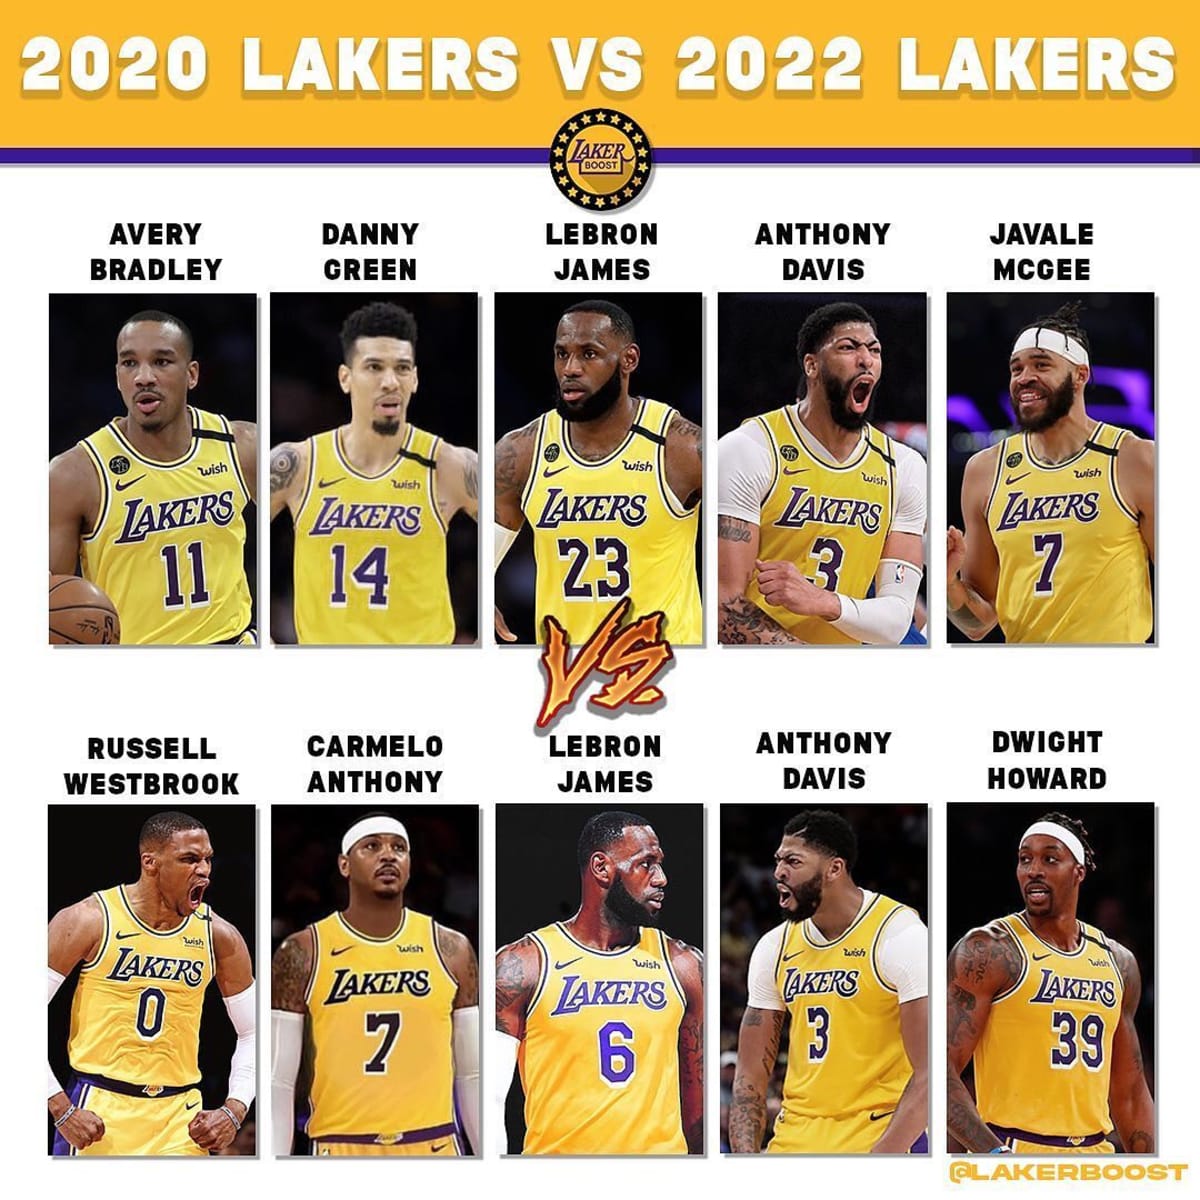 angeles lakers roster